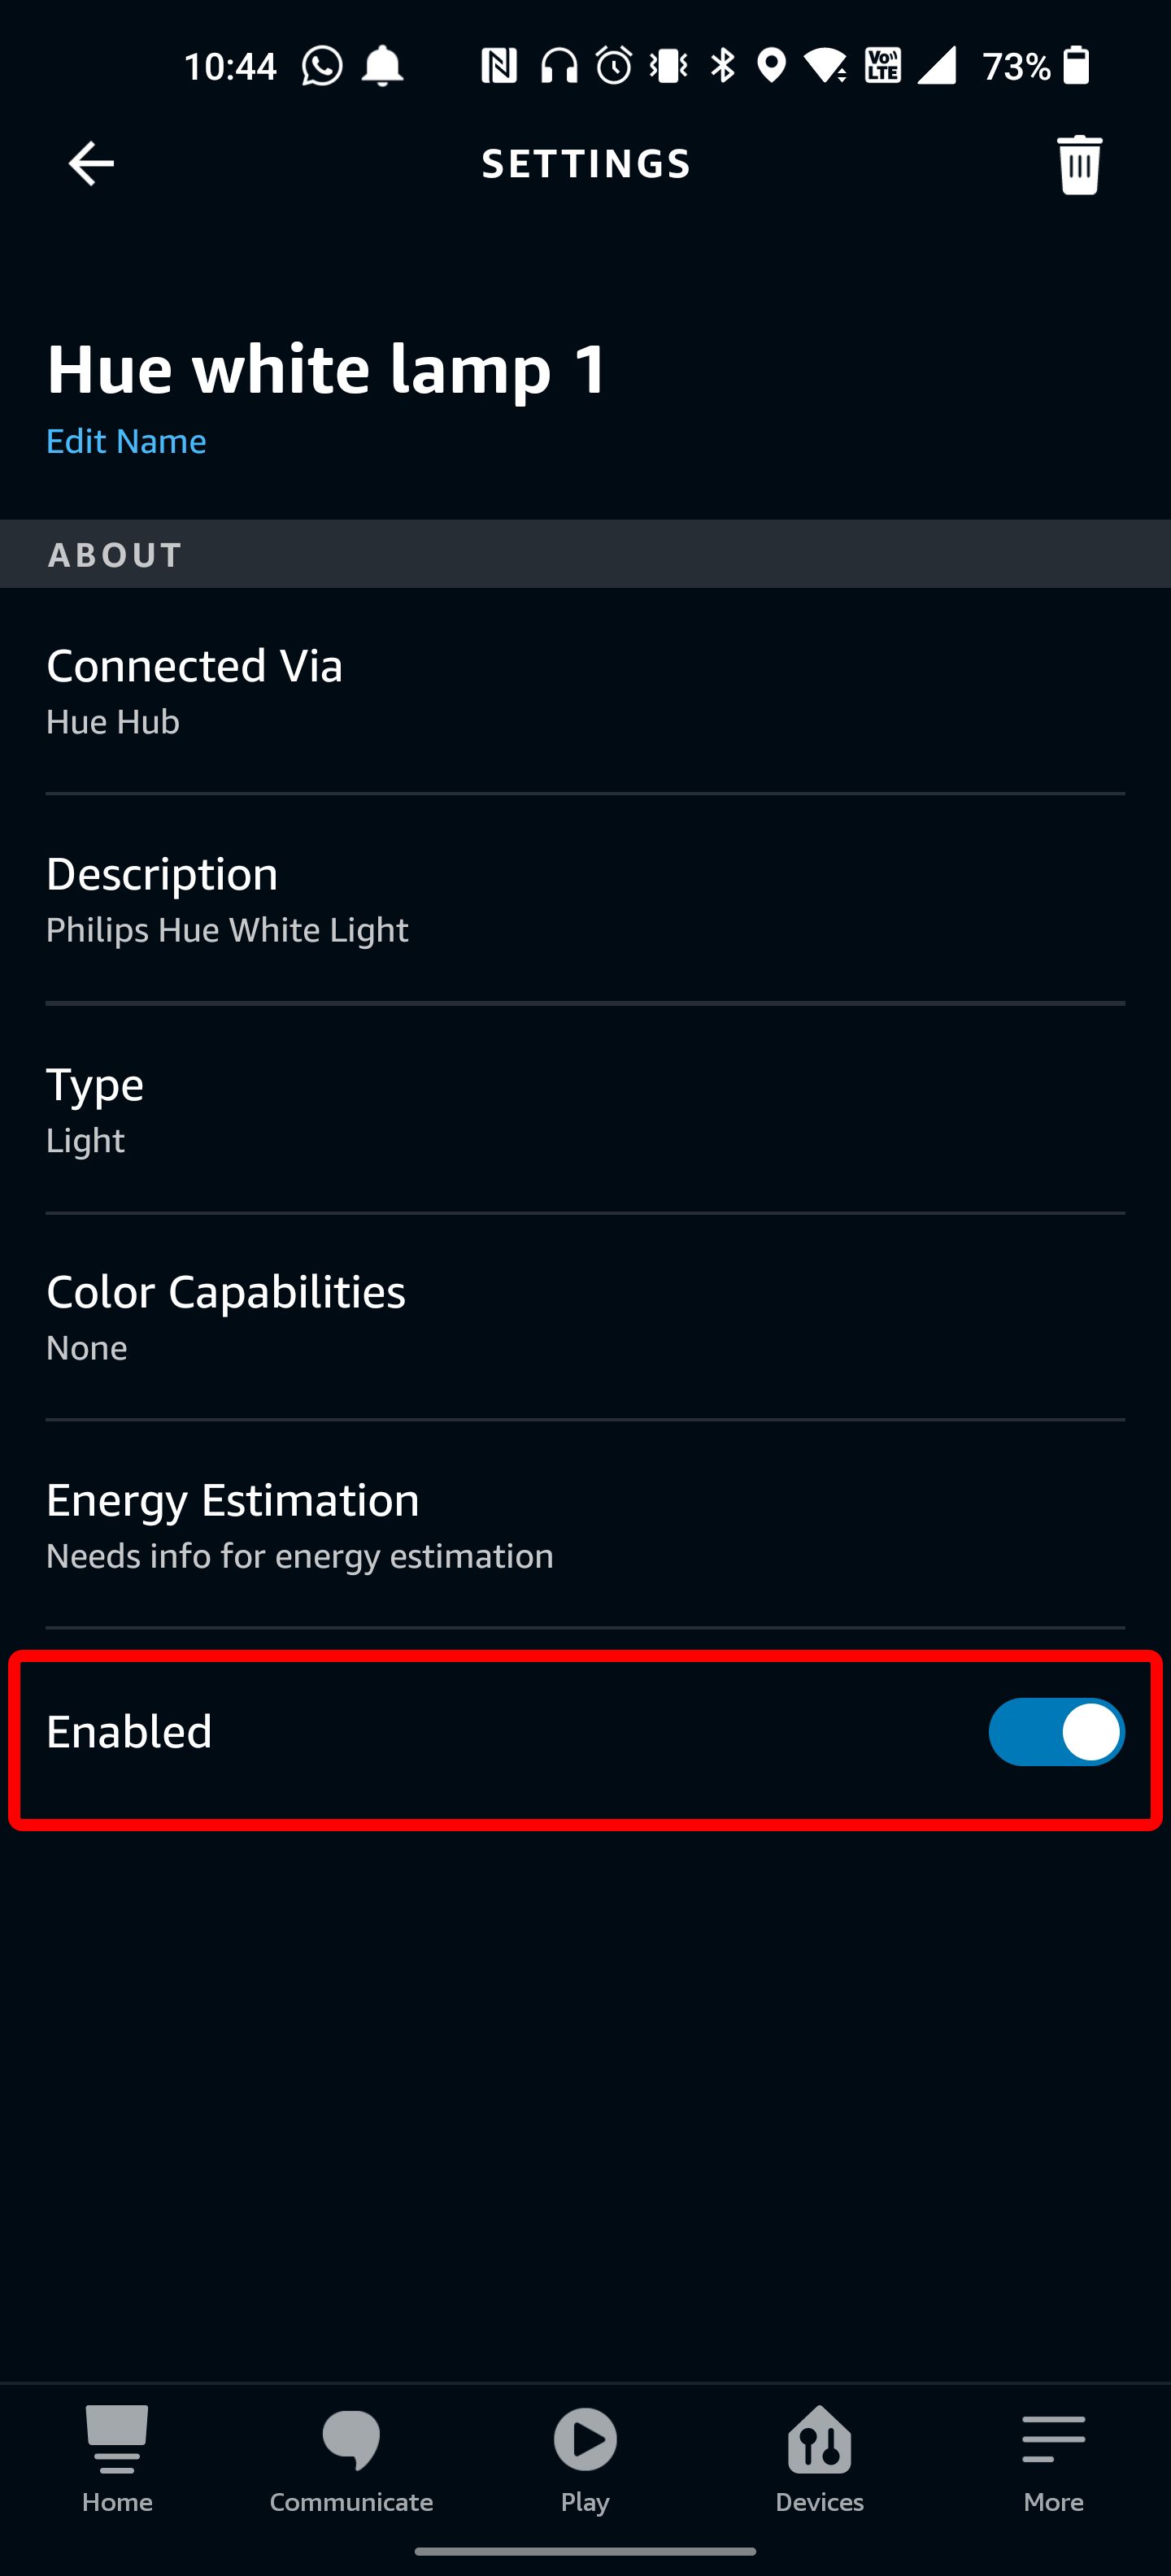 A red rectangle around the Enabled option for a Hue lamp in the Alexa app.